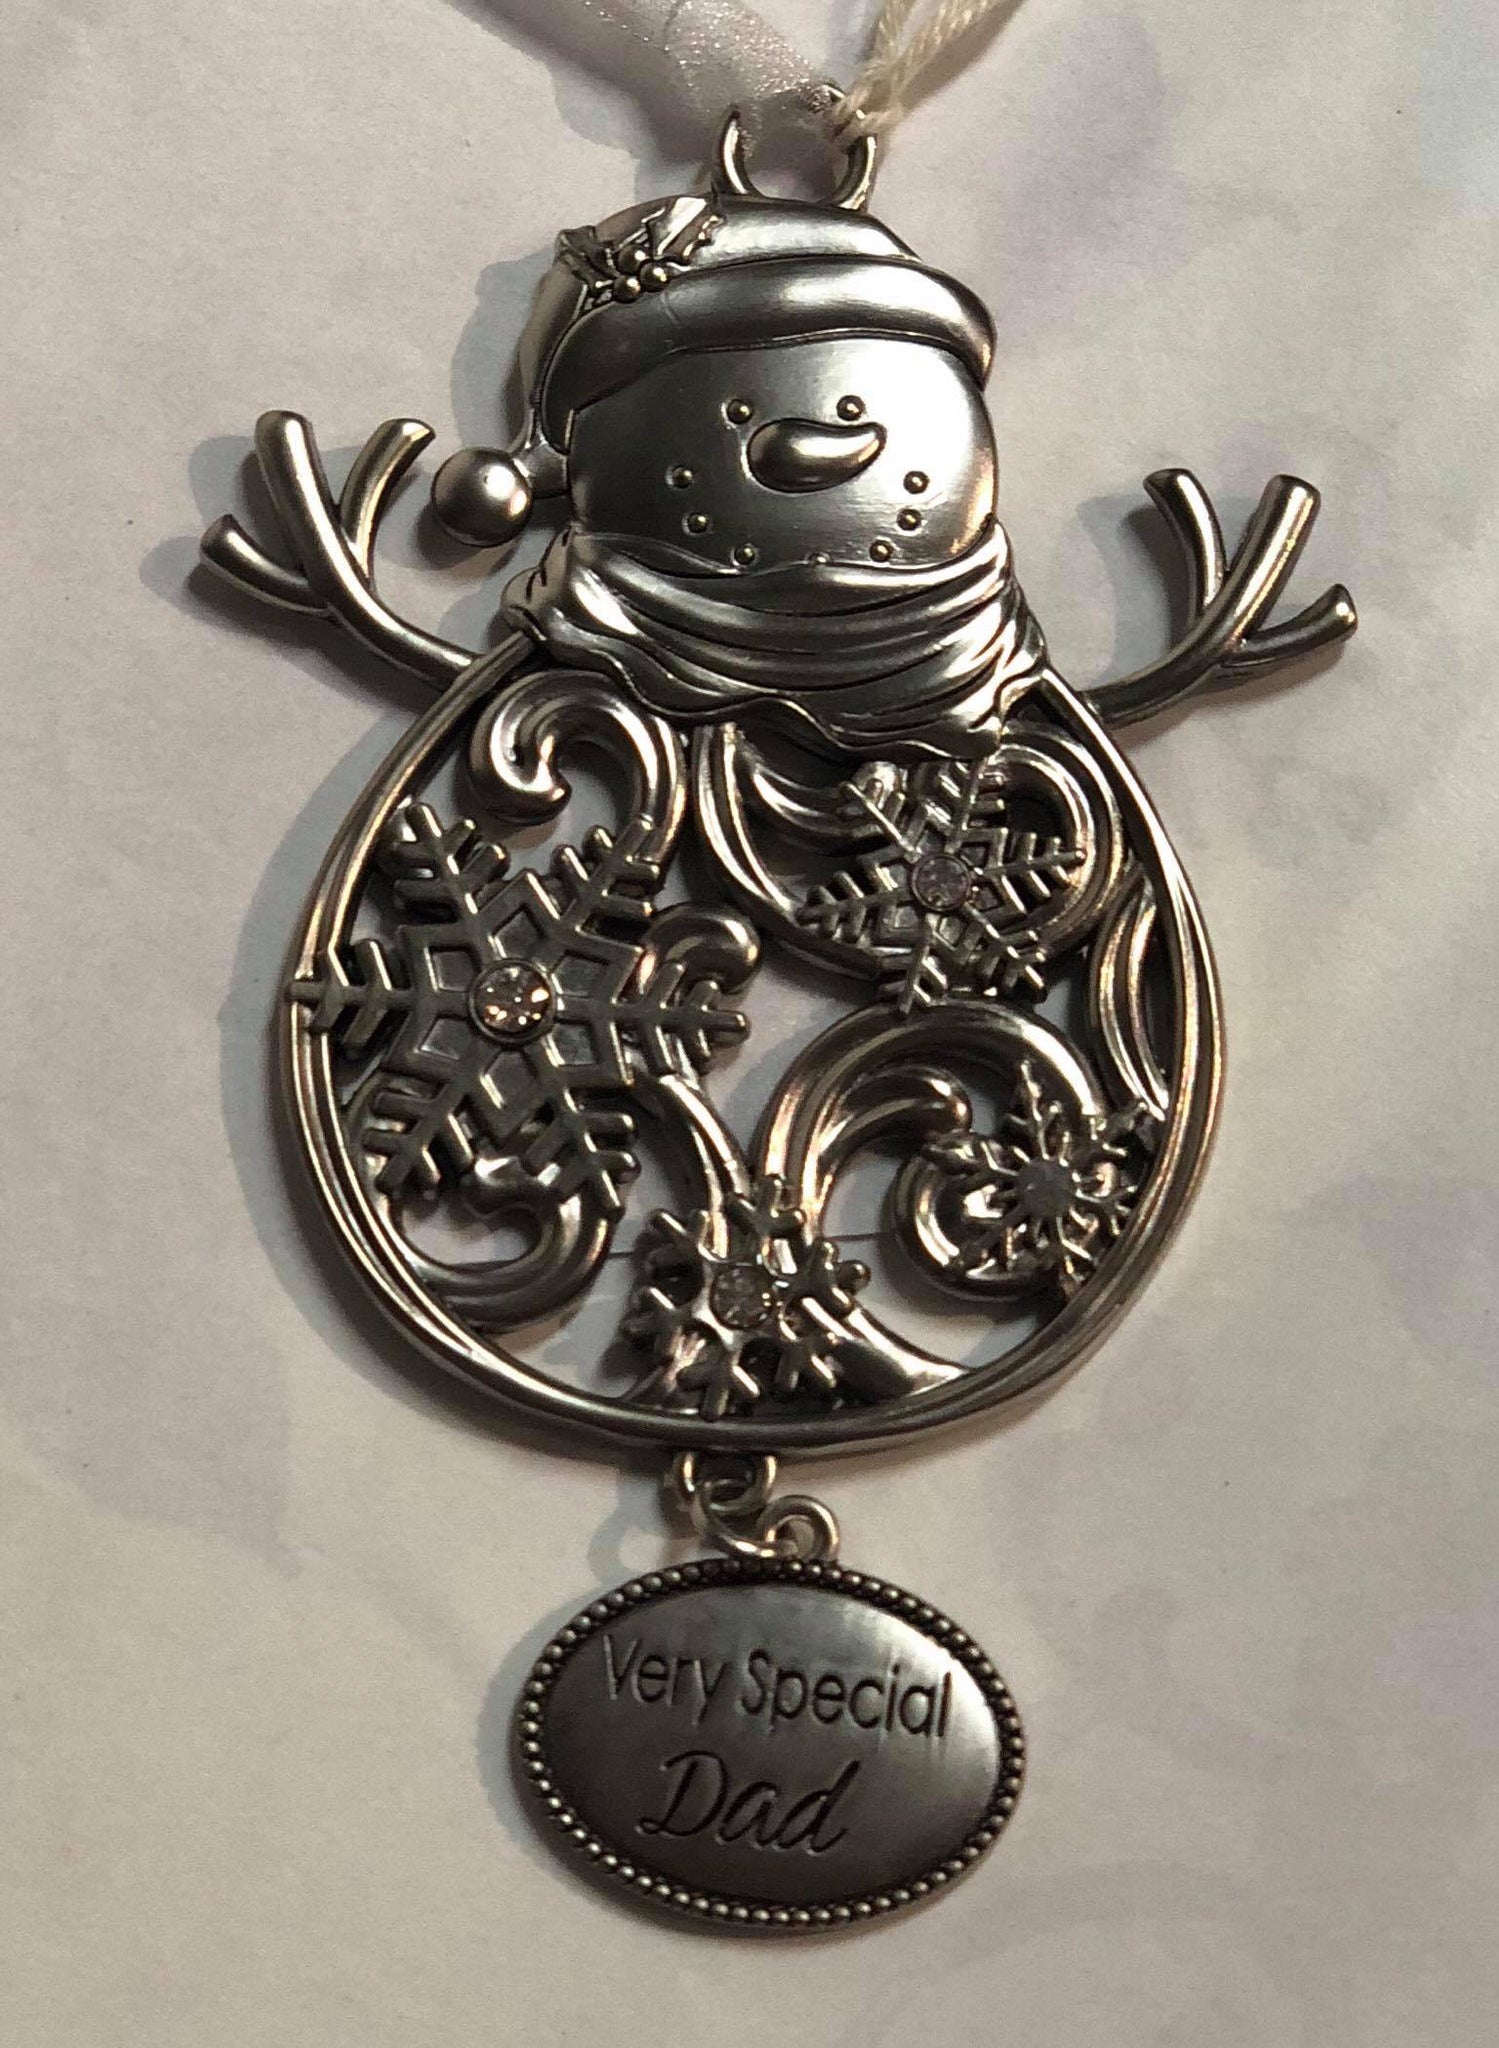 Snowman Tree Ornament with Hanging Charm "Very Special Dad"